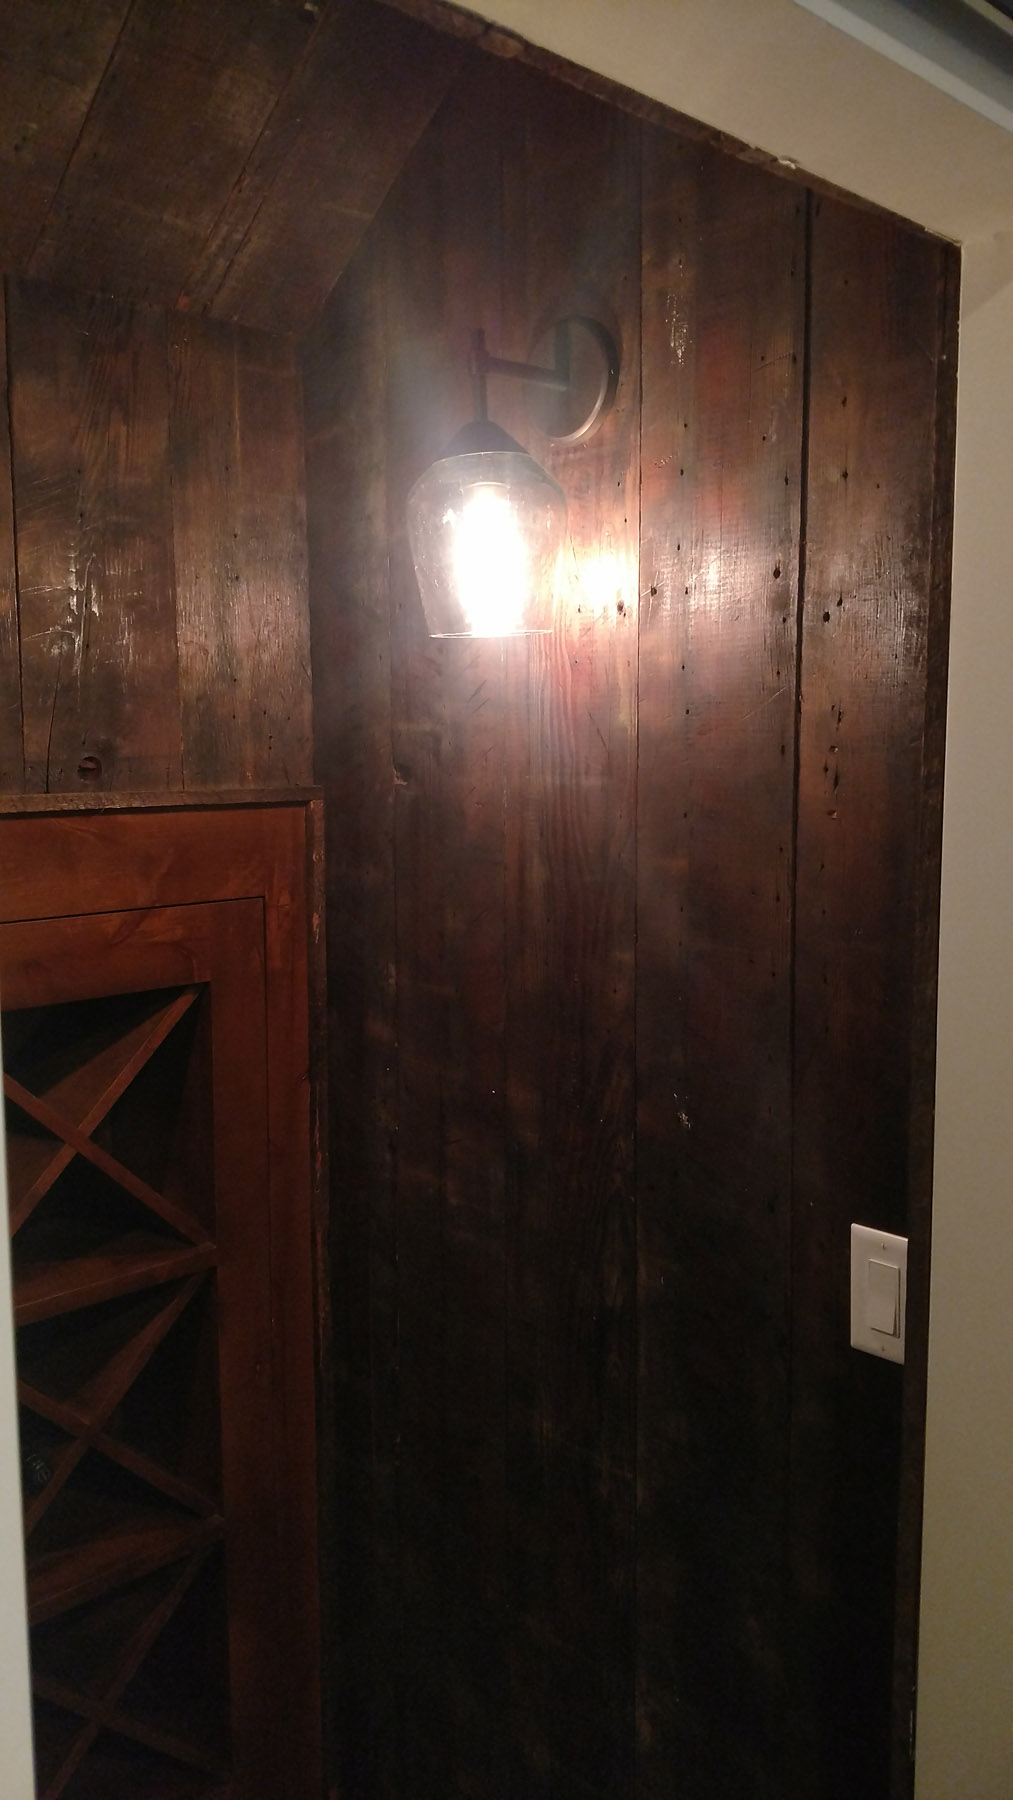 Reclaimed barn-wood accents